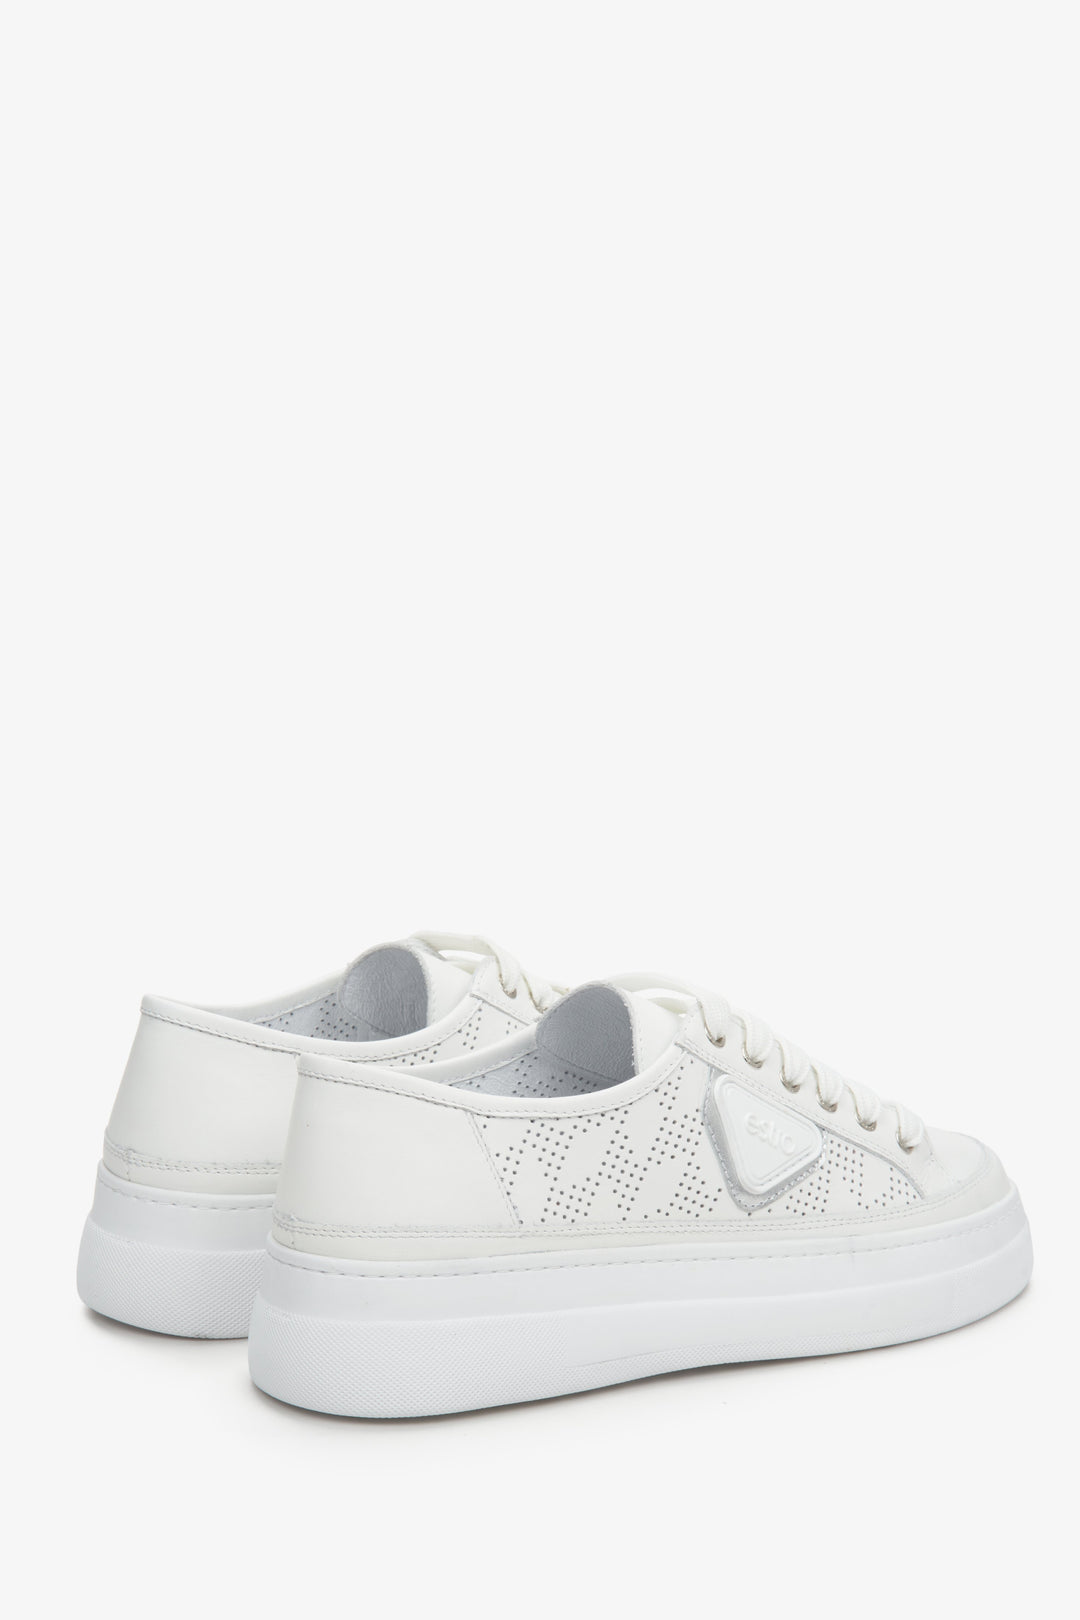 Women's white  leather sneakers by Estro for summer - close-up of the heel counter and side seam of the shoes.